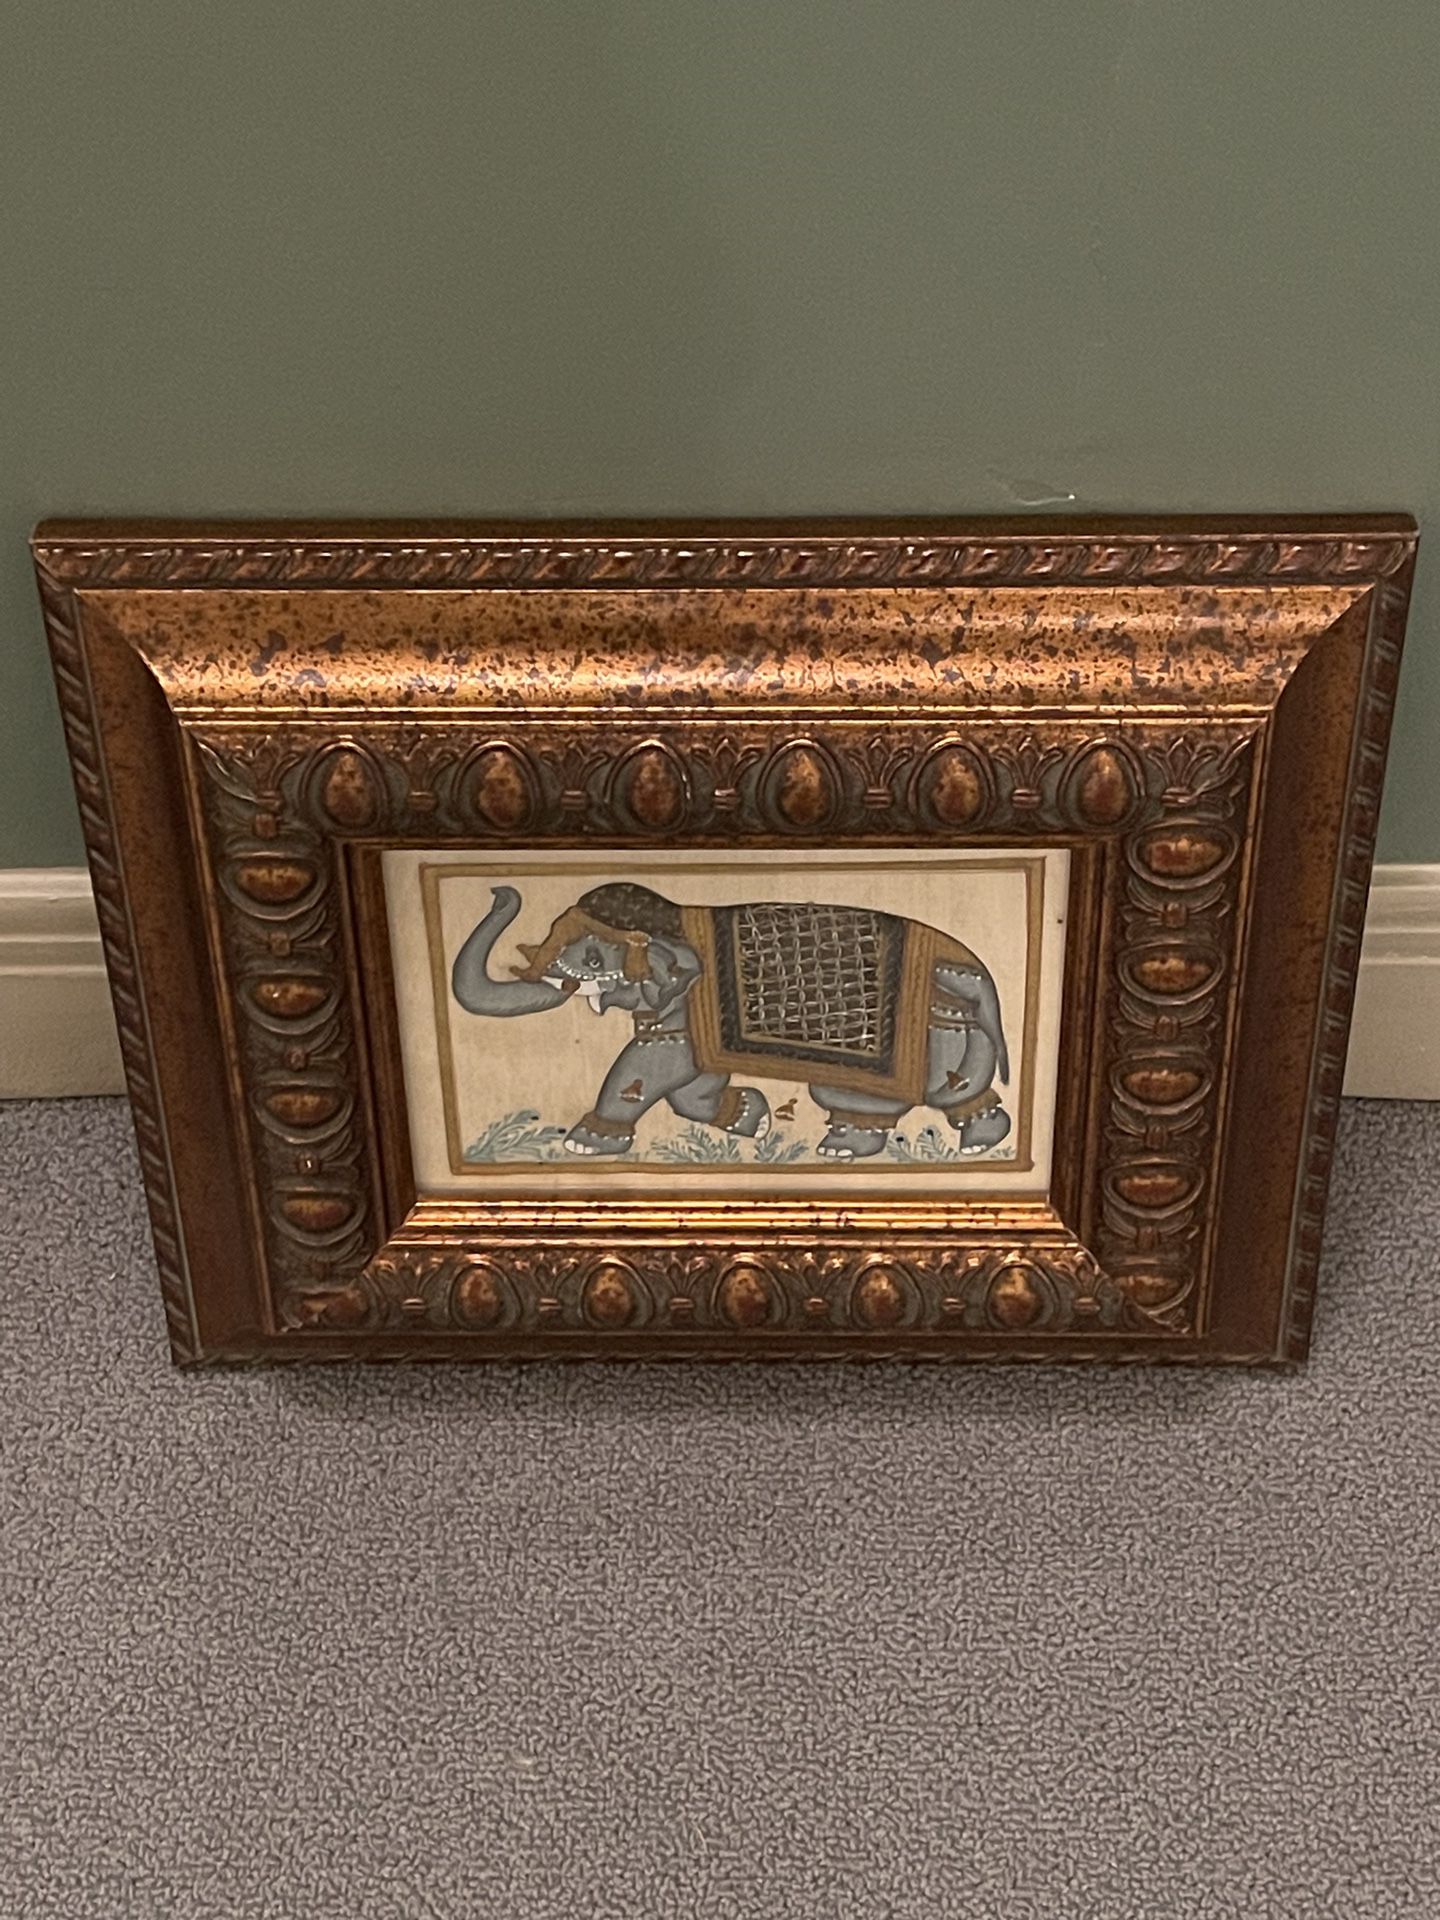 Iconic ELEPHANT etched w/Gold Leaf on Fine Silk & Framed in ORNATE WOOD (2 available) - firm price EACH